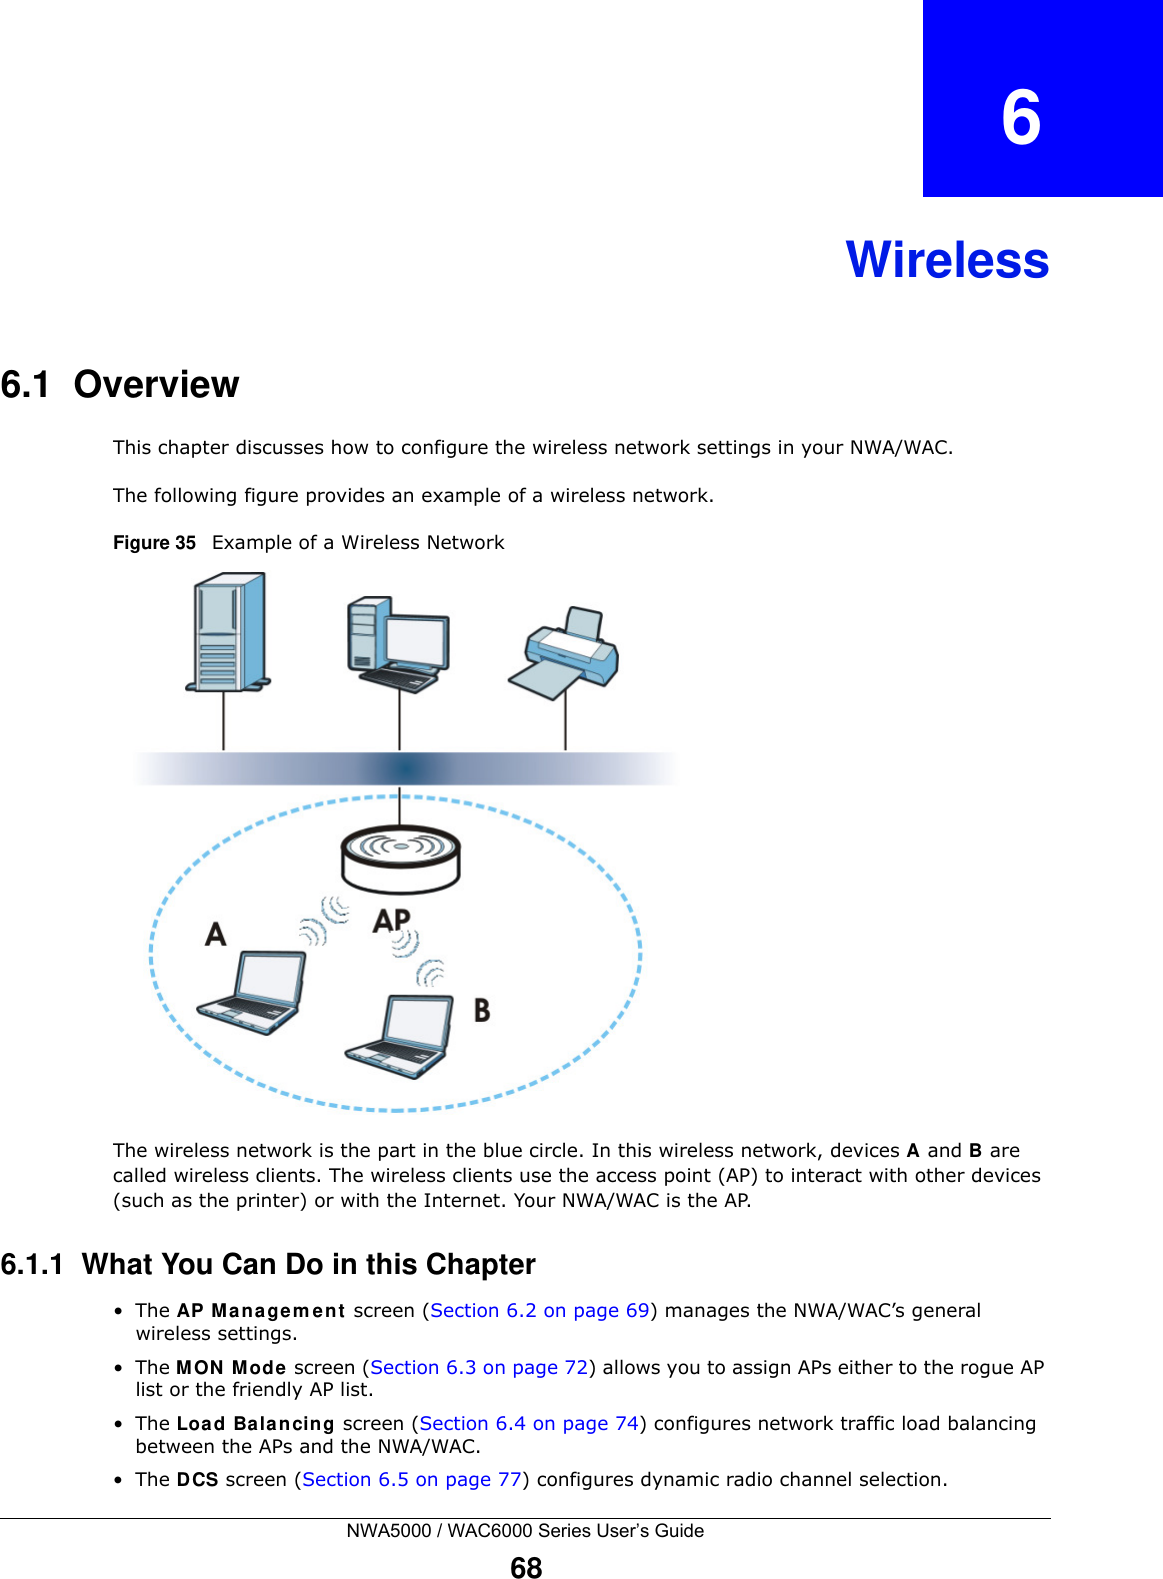 NWA5000 / WAC6000 Series User’s Guide68CHAPTER   6Wireless6.1  OverviewThis chapter discusses how to configure the wireless network settings in your NWA/WAC. The following figure provides an example of a wireless network.Figure 35   Example of a Wireless NetworkThe wireless network is the part in the blue circle. In this wireless network, devices A and B are called wireless clients. The wireless clients use the access point (AP) to interact with other devices (such as the printer) or with the Internet. Your NWA/WAC is the AP.6.1.1  What You Can Do in this Chapter•The AP M ana gem en t screen (Section 6.2 on page 69) manages the NWA/WAC’s general wireless settings.•The MON Mode screen (Section 6.3 on page 72) allows you to assign APs either to the rogue AP list or the friendly AP list.•The Load Balancing screen (Section 6.4 on page 74) configures network traffic load balancing between the APs and the NWA/WAC. •The DCS screen (Section 6.5 on page 77) configures dynamic radio channel selection.